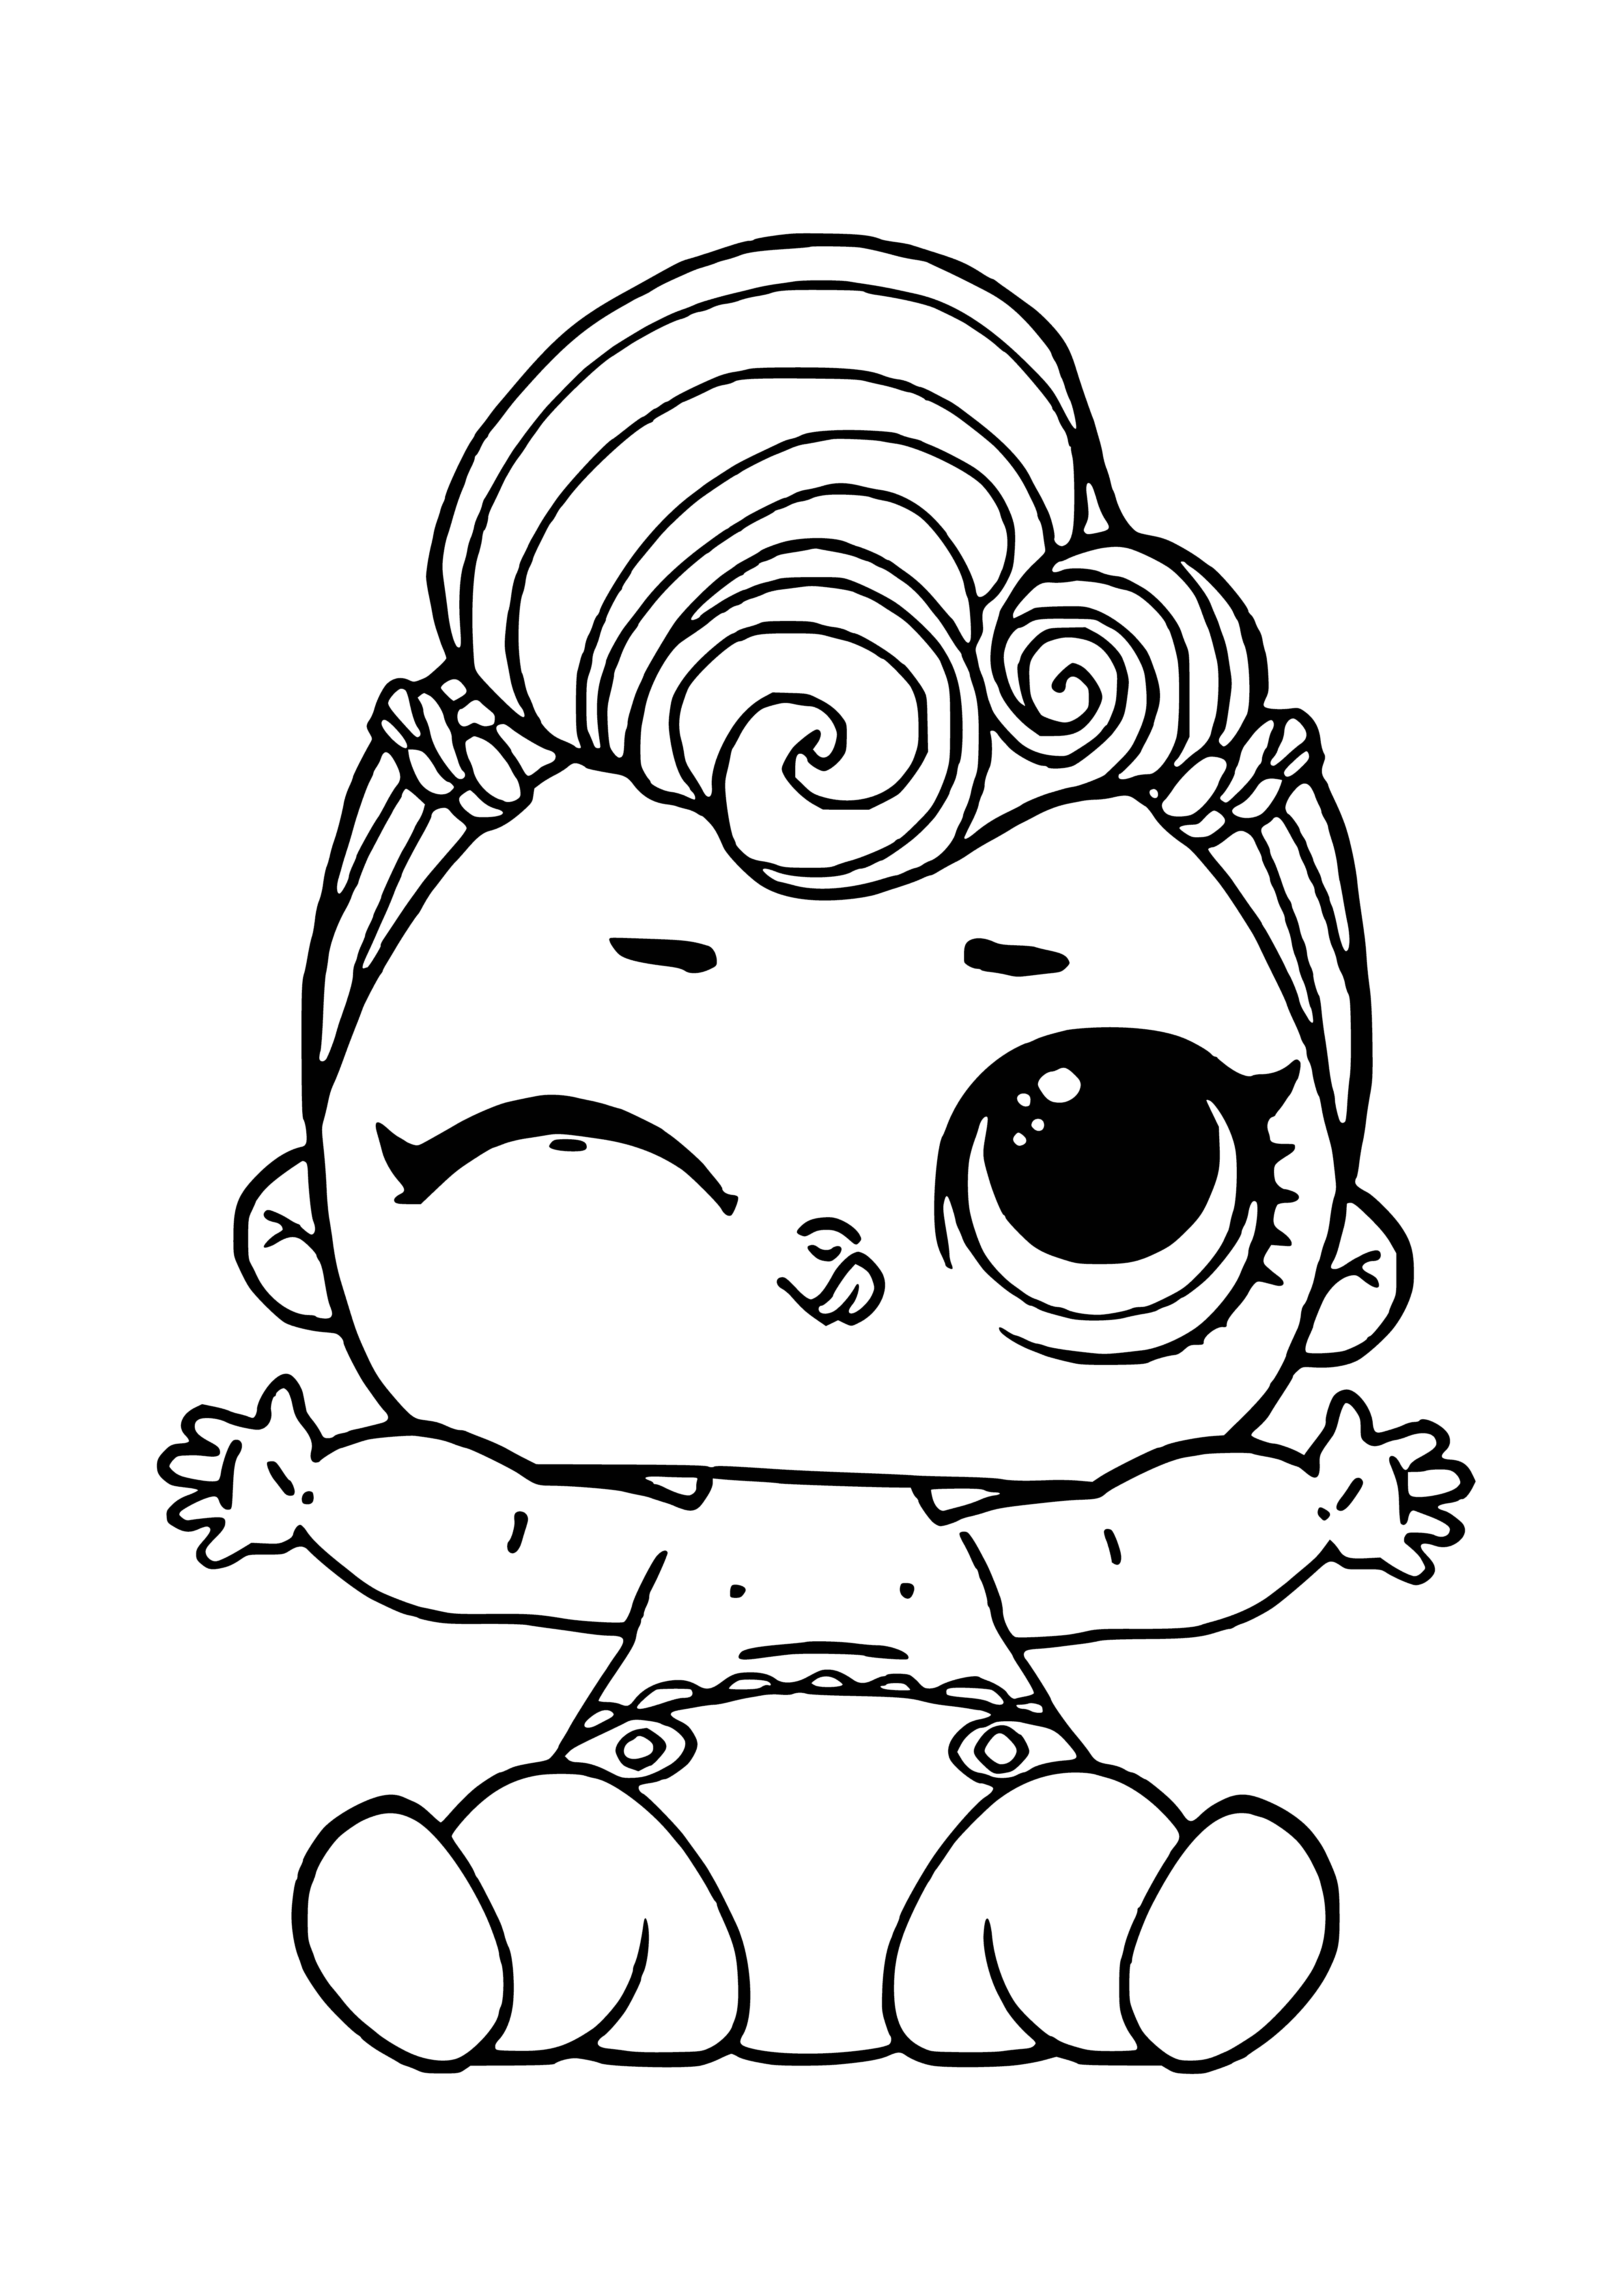 coloring page: A baby in a gray onesie with a pacifier looks around in confusion while sitting on the floor.